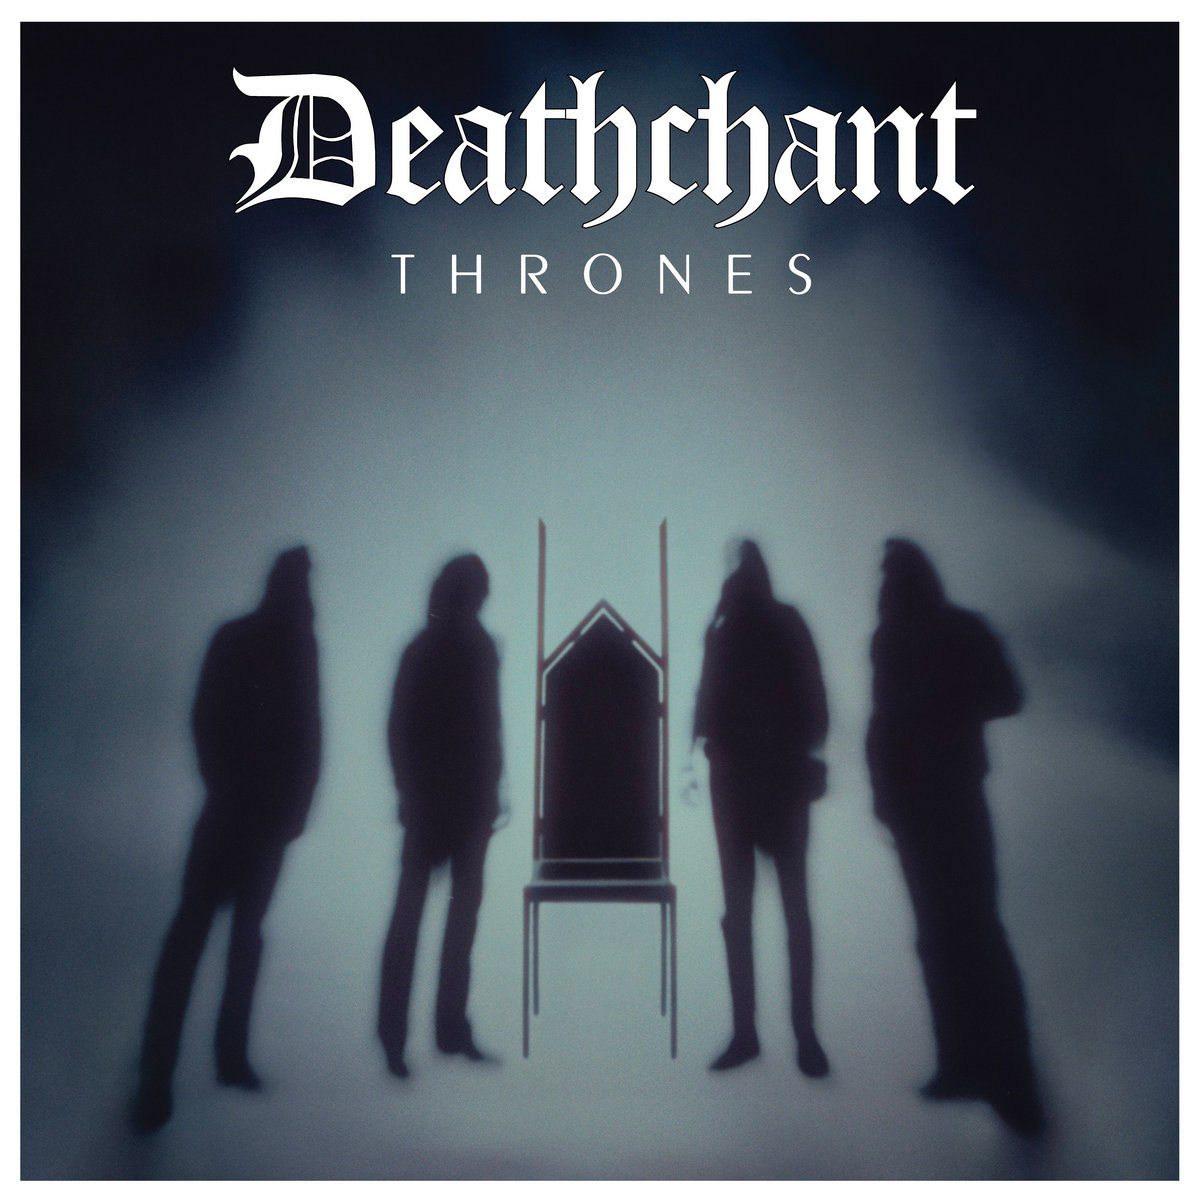 Thrones by Deathchant